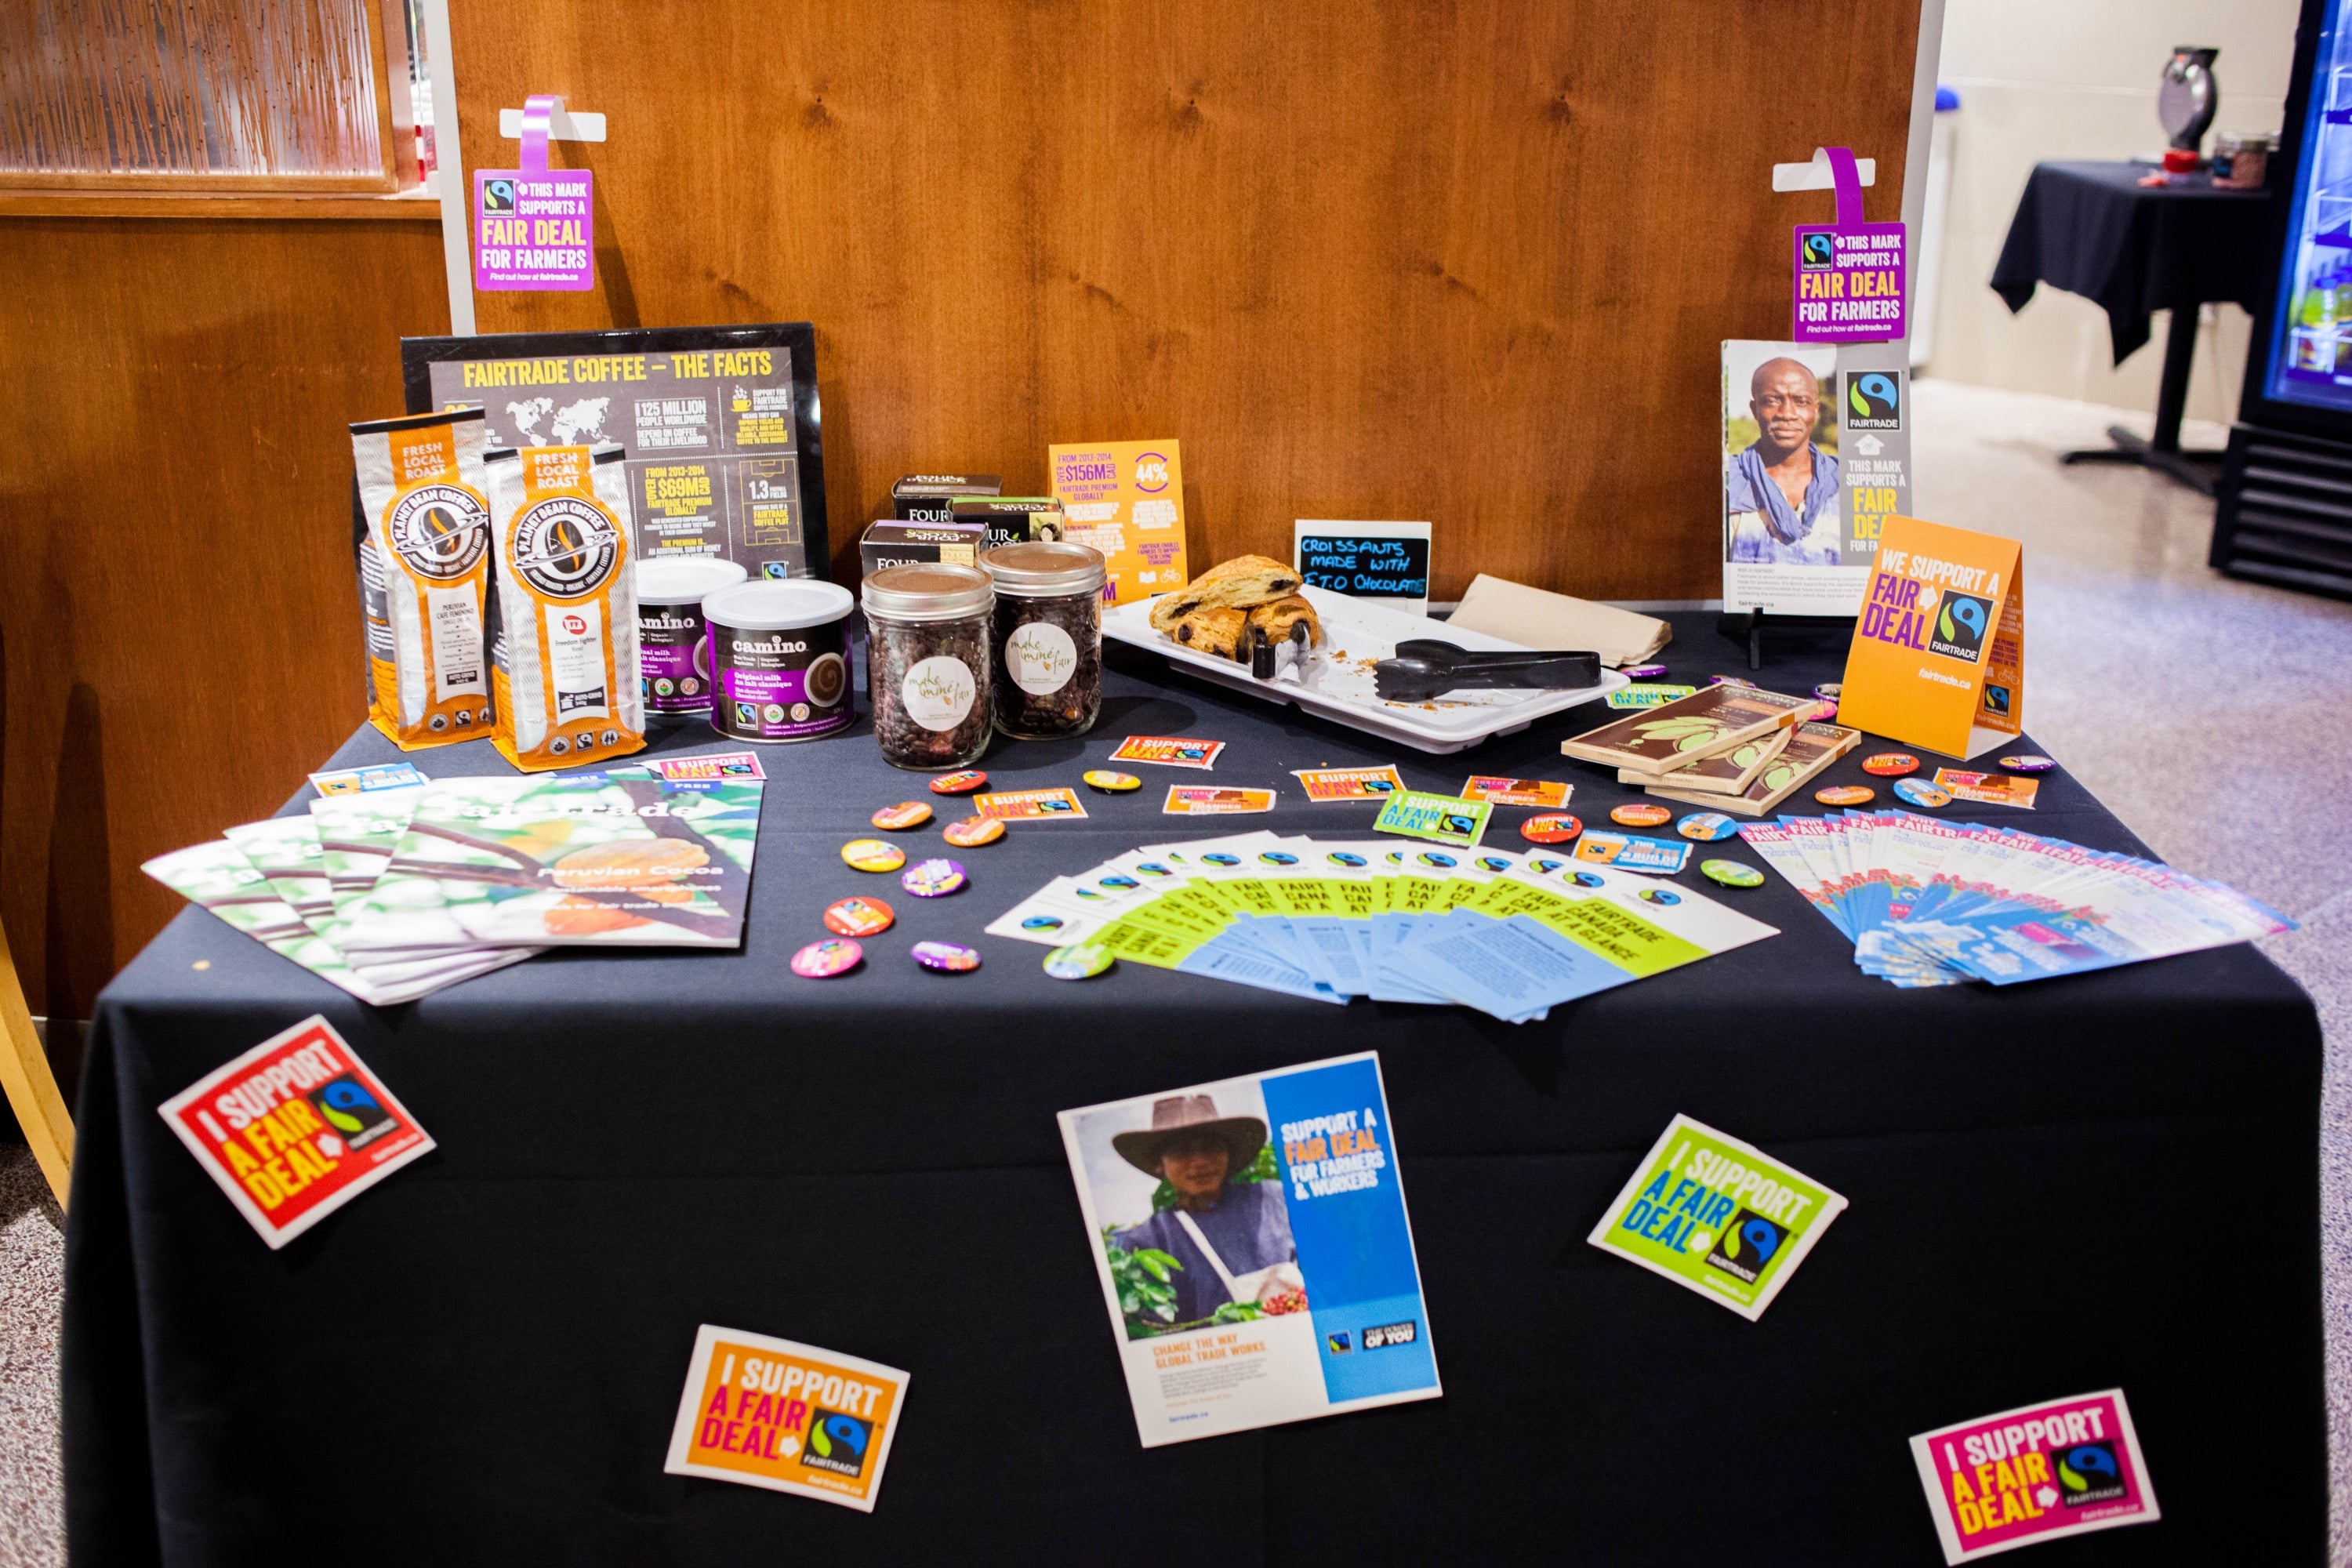 Table of Fair Trade products and information